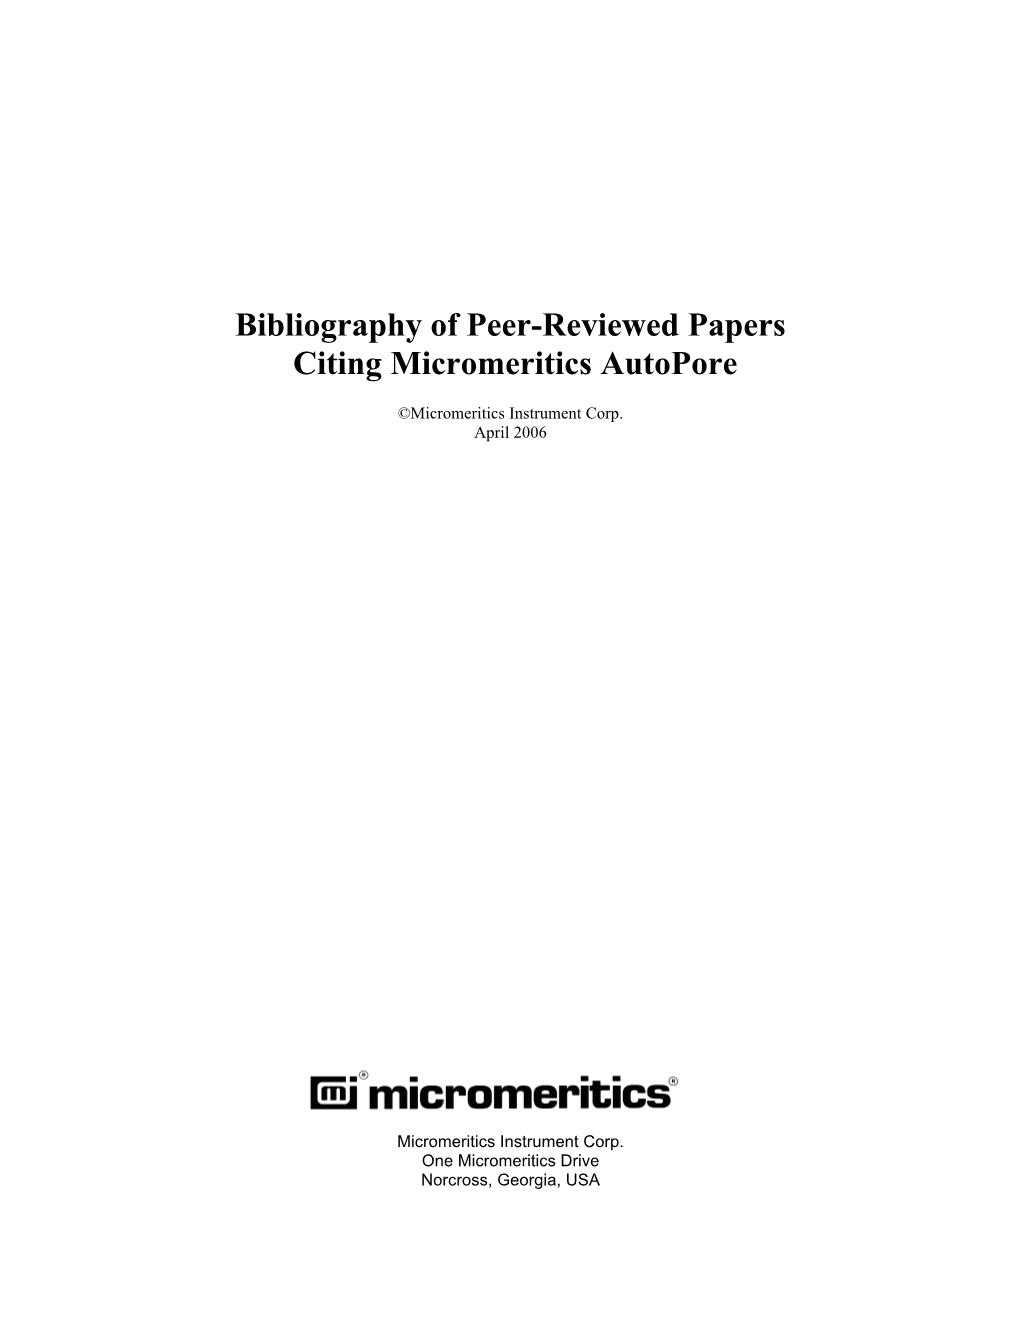 Bibliography of Peer-Reviewed Papers Citing Micromeritics Autopore